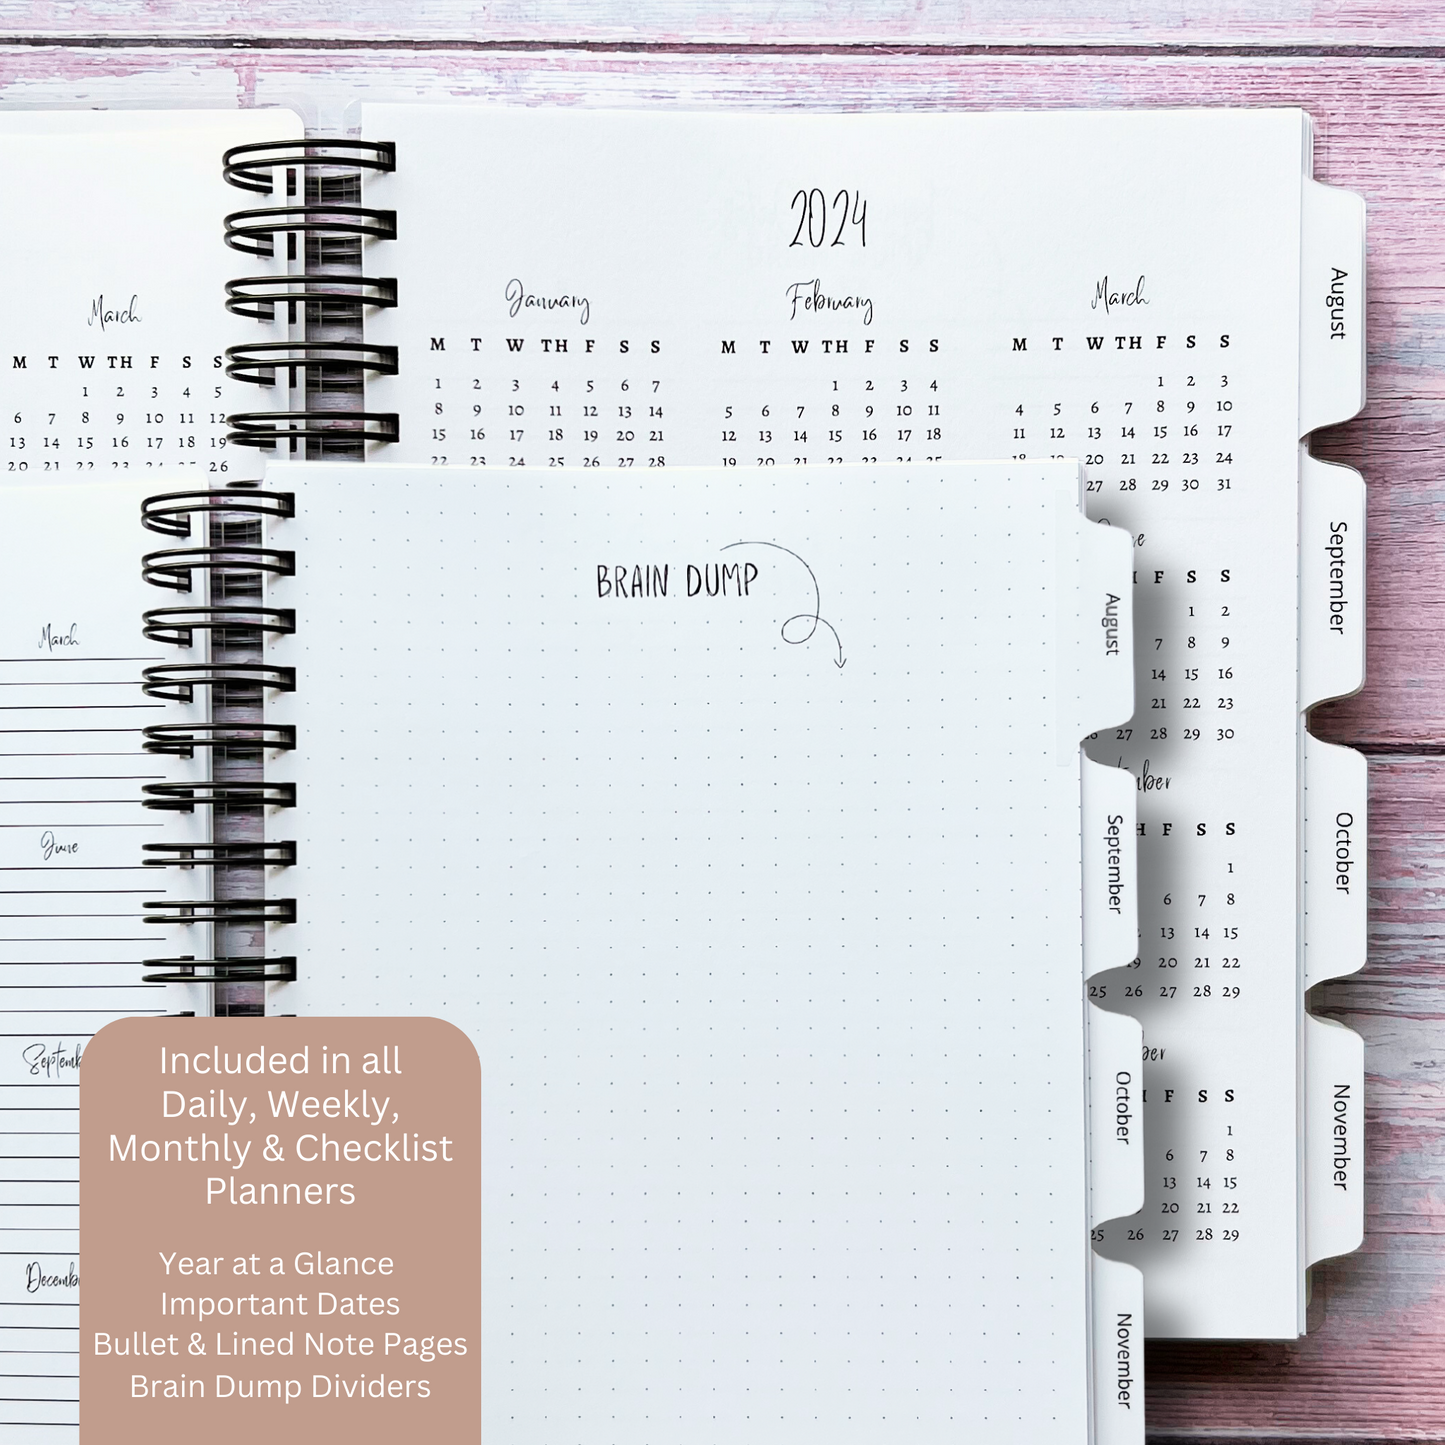 Personalized Monthly Planner - Mystical Moth